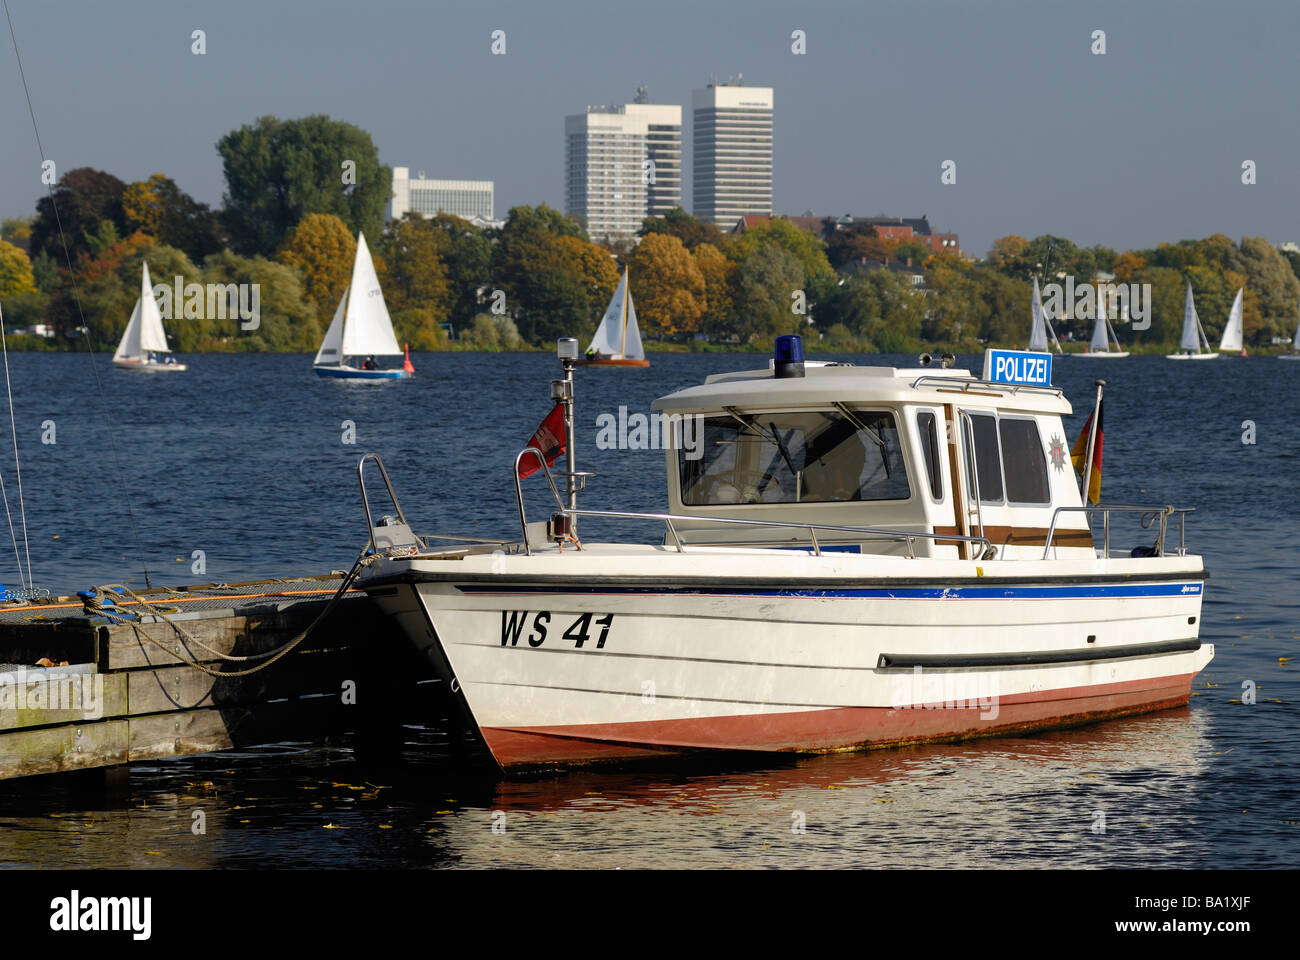 A small Police boat upon the Außenalster, in the background the skyskrapers of Mundsburg in Hamburg, Germany. Stock Photo